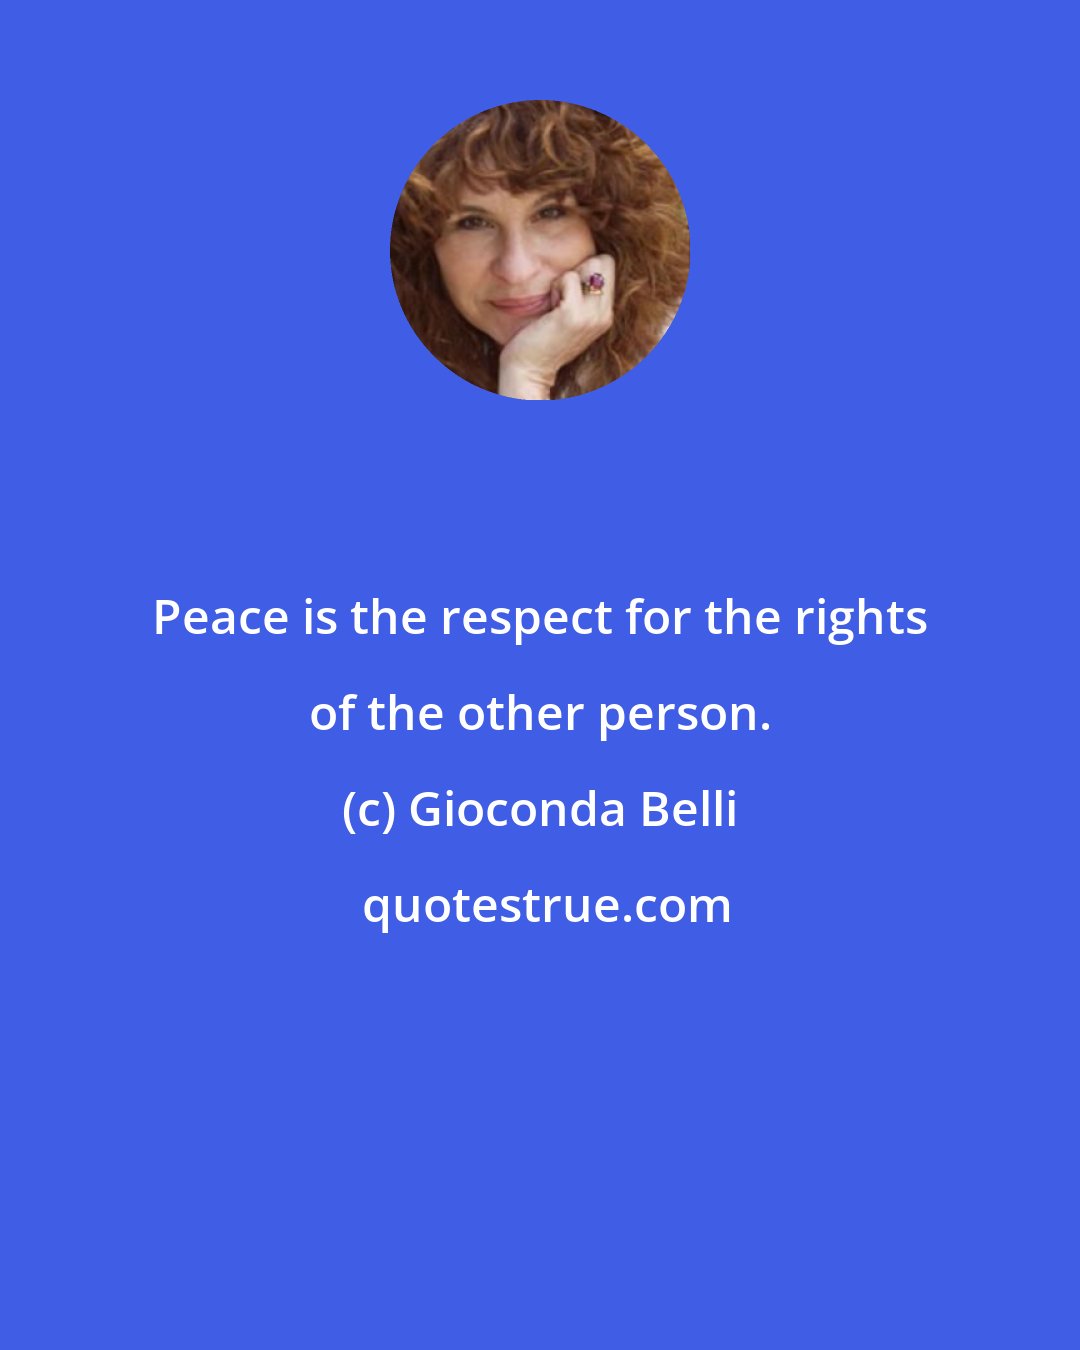 Gioconda Belli: Peace is the respect for the rights of the other person.